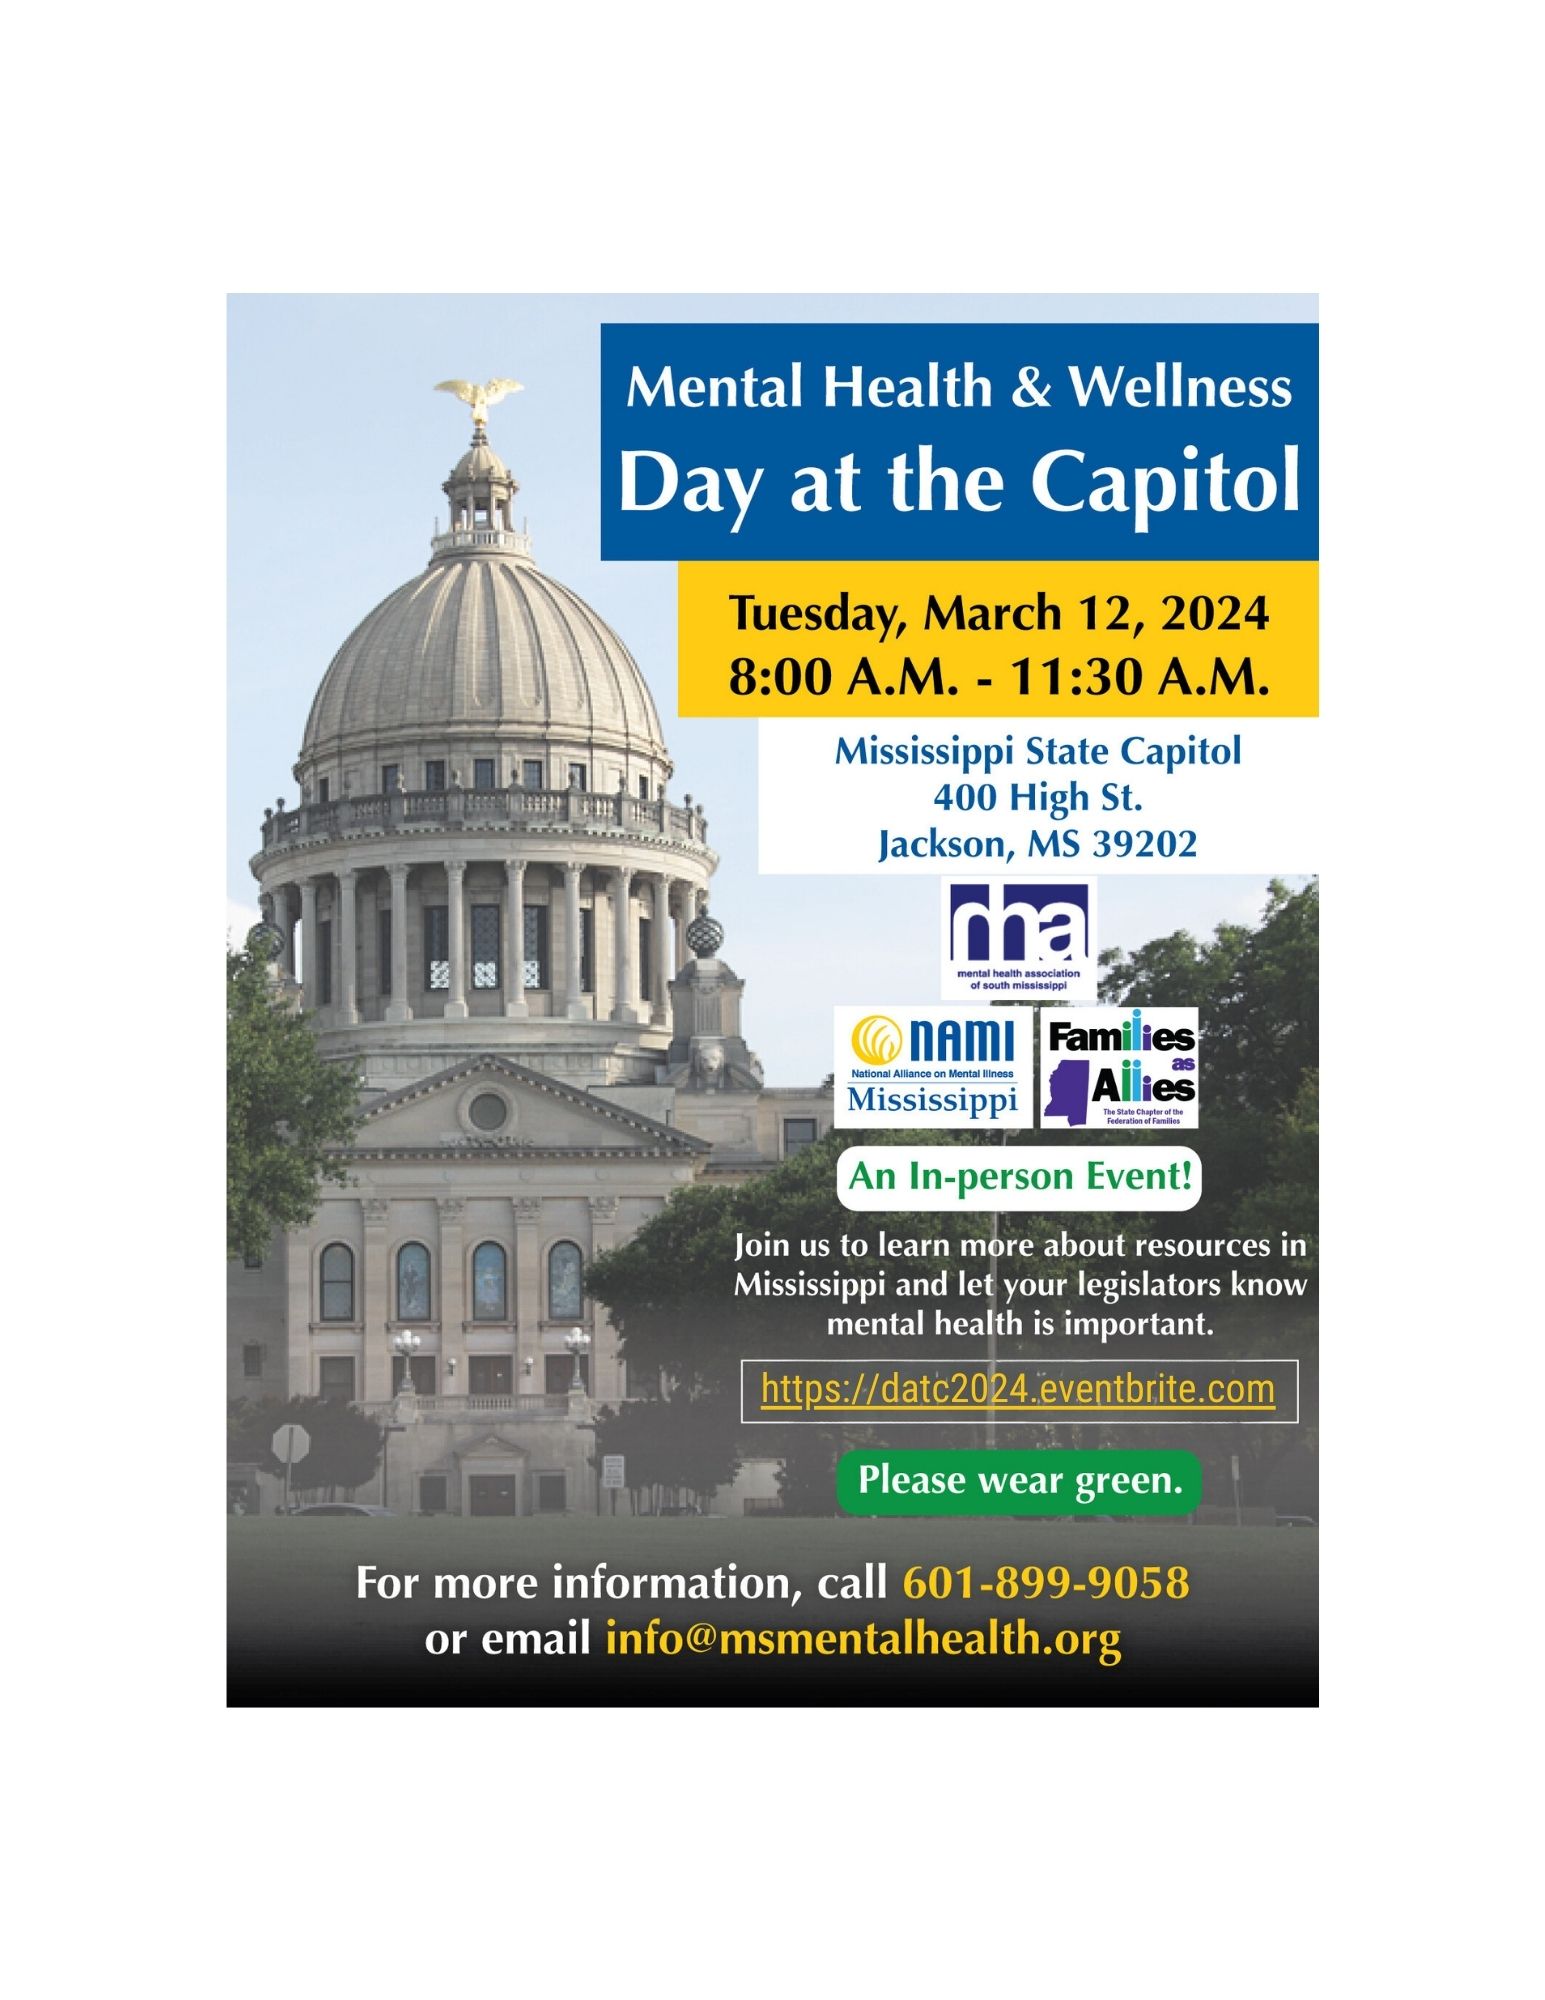 Mental Health and Wellness Day at the Capitol